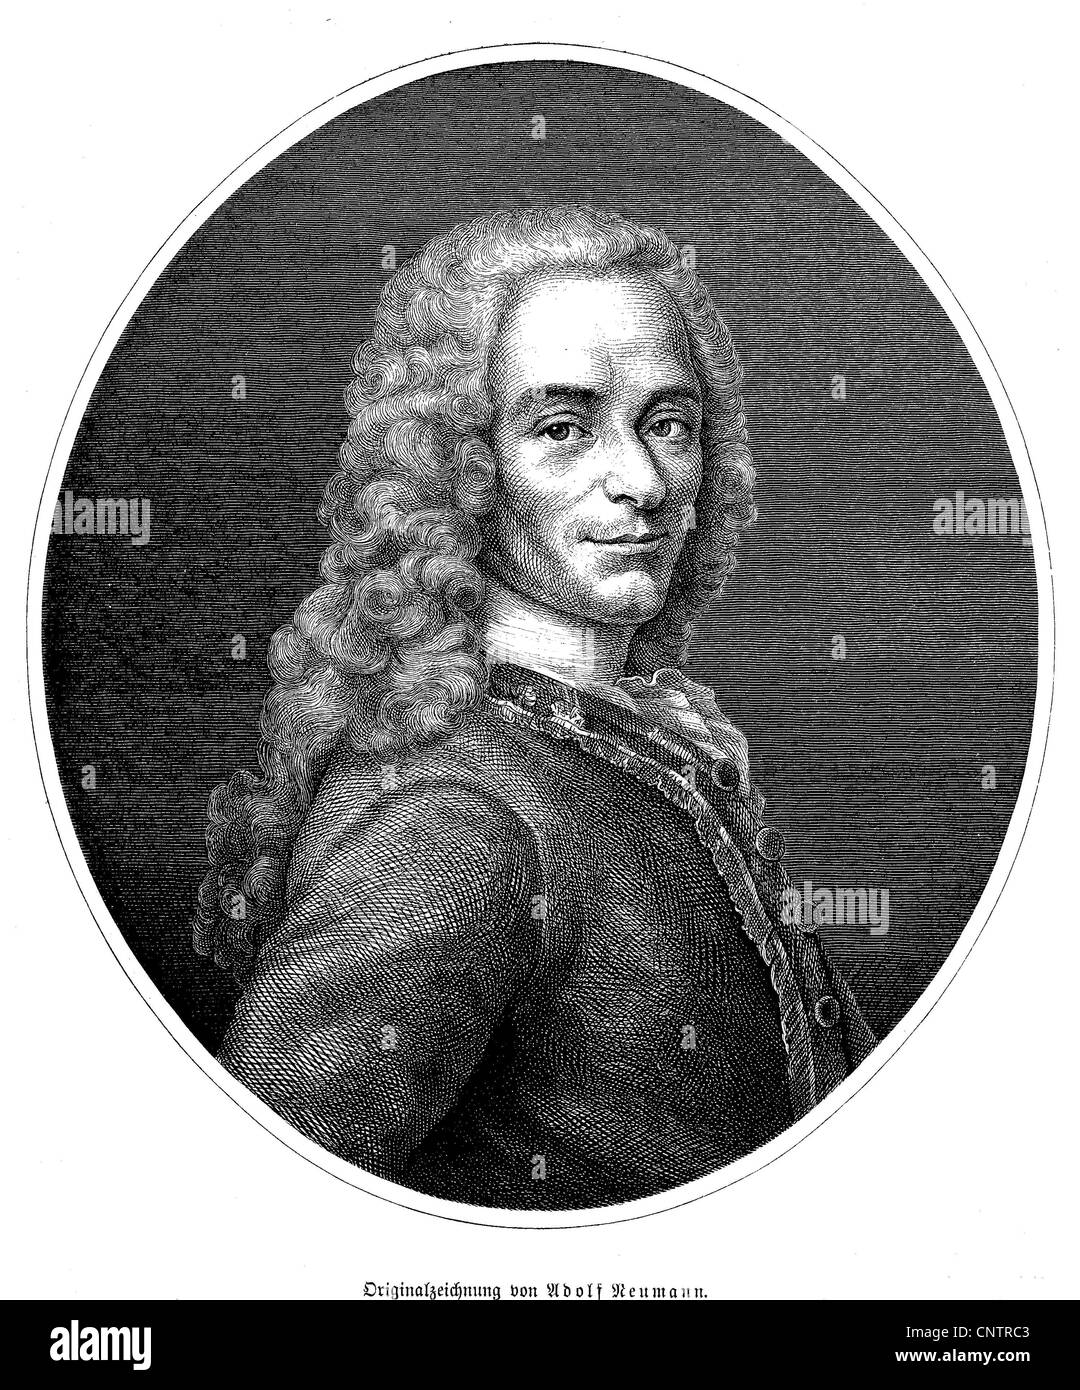 Voltaire, actually Francois Marie Arouet, 1694-1778, author of French and European Enlightenment, historical engraving, circa 18 Stock Photo